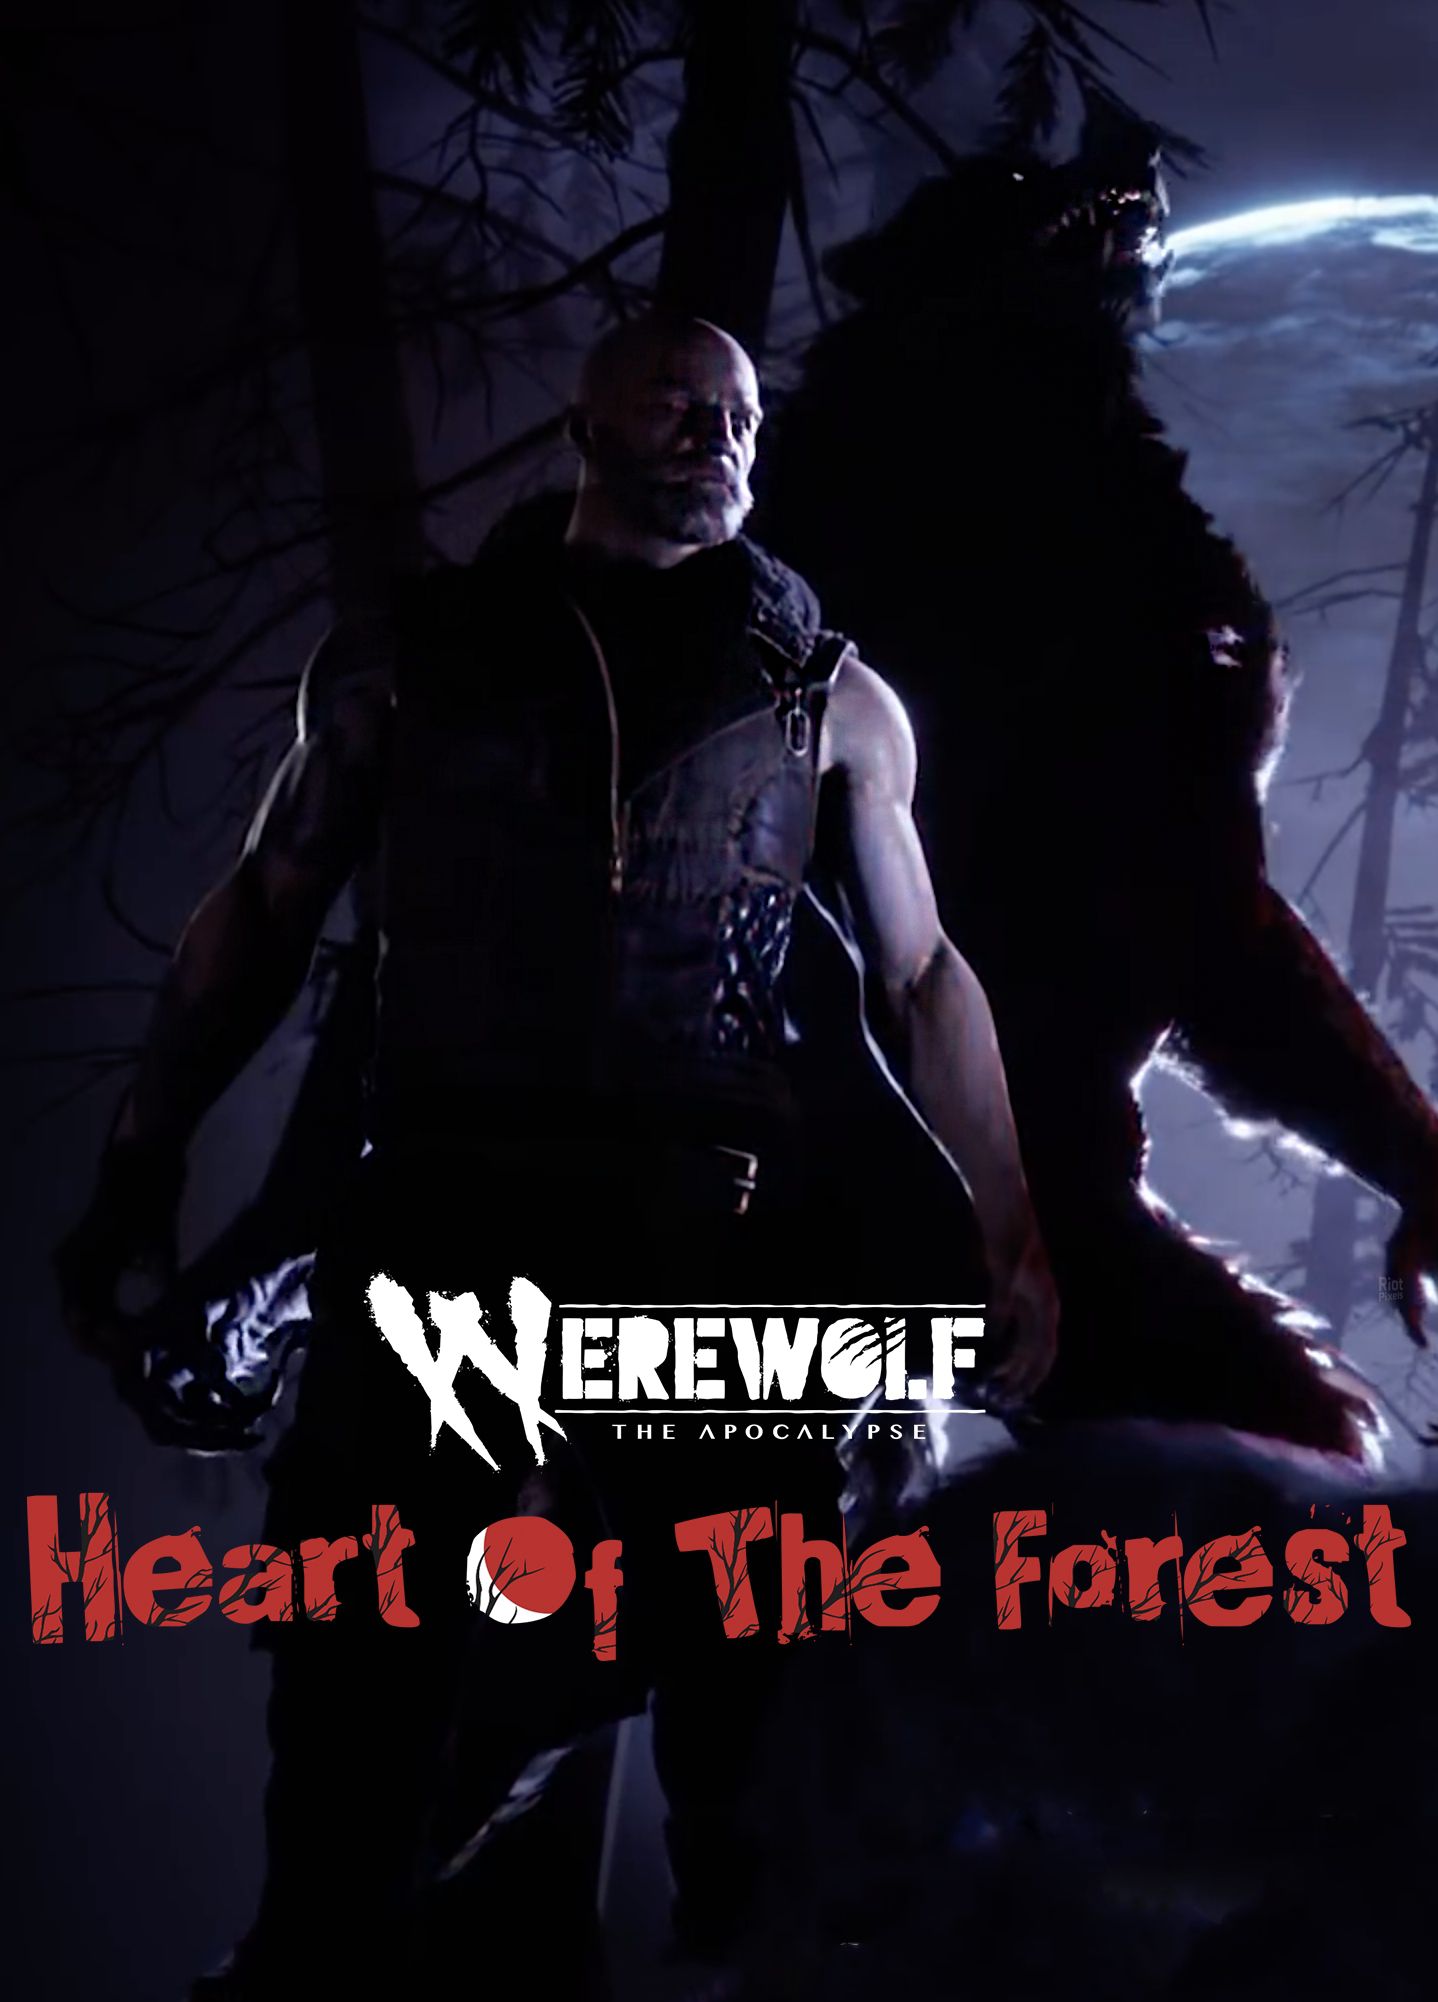 Werewolf the Apocalypse: Heart of the Forest  - Jeu vidéo streaming VF gratuit complet